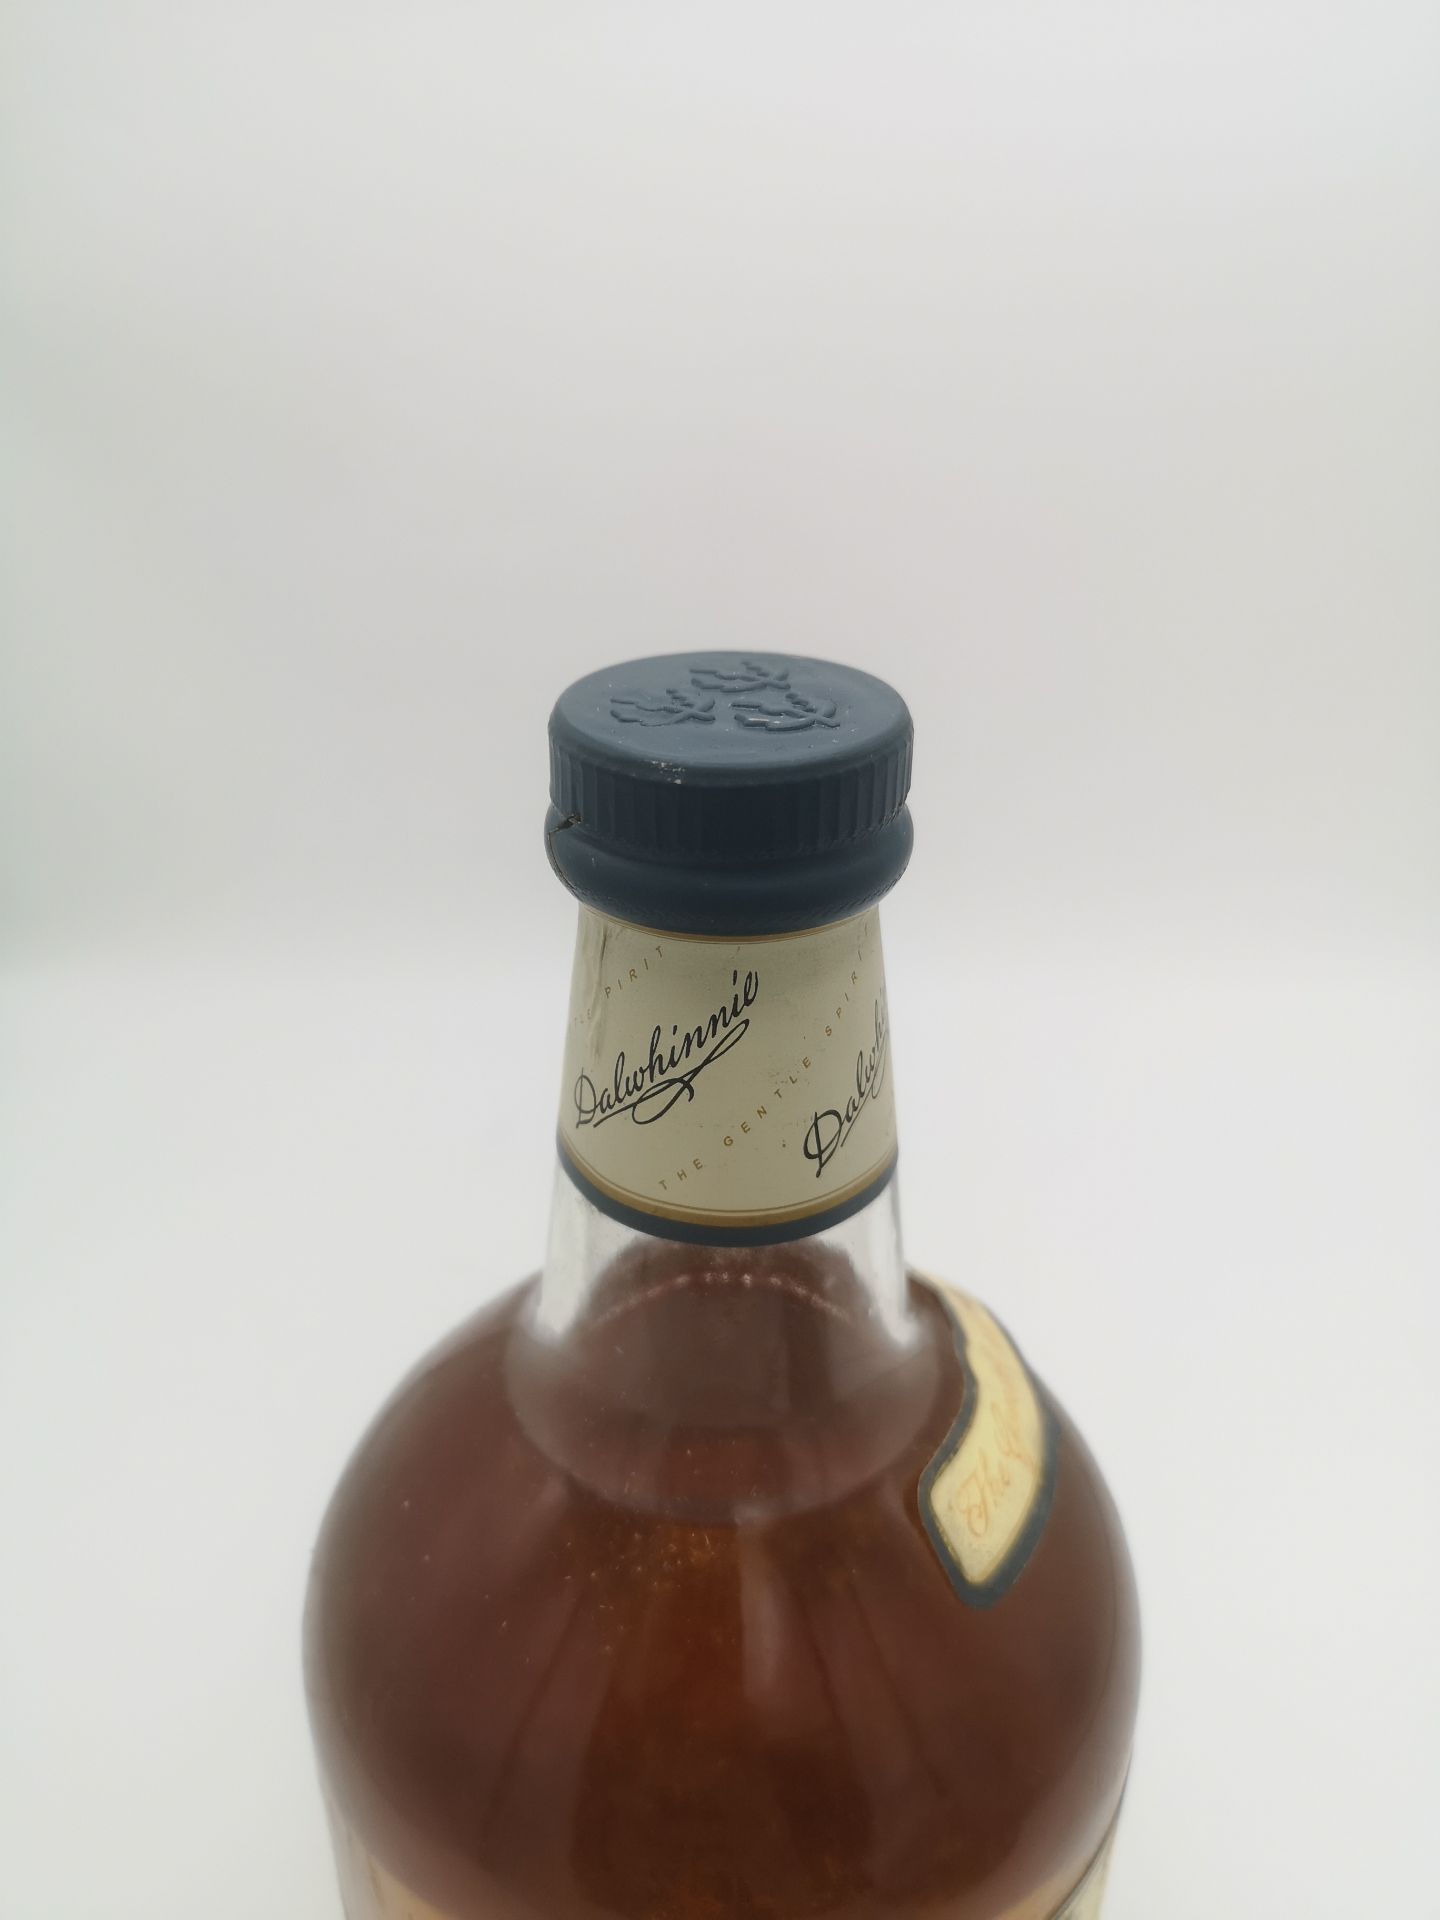 1l bottle of Dalwhinnie Scotch whisky - Image 3 of 8